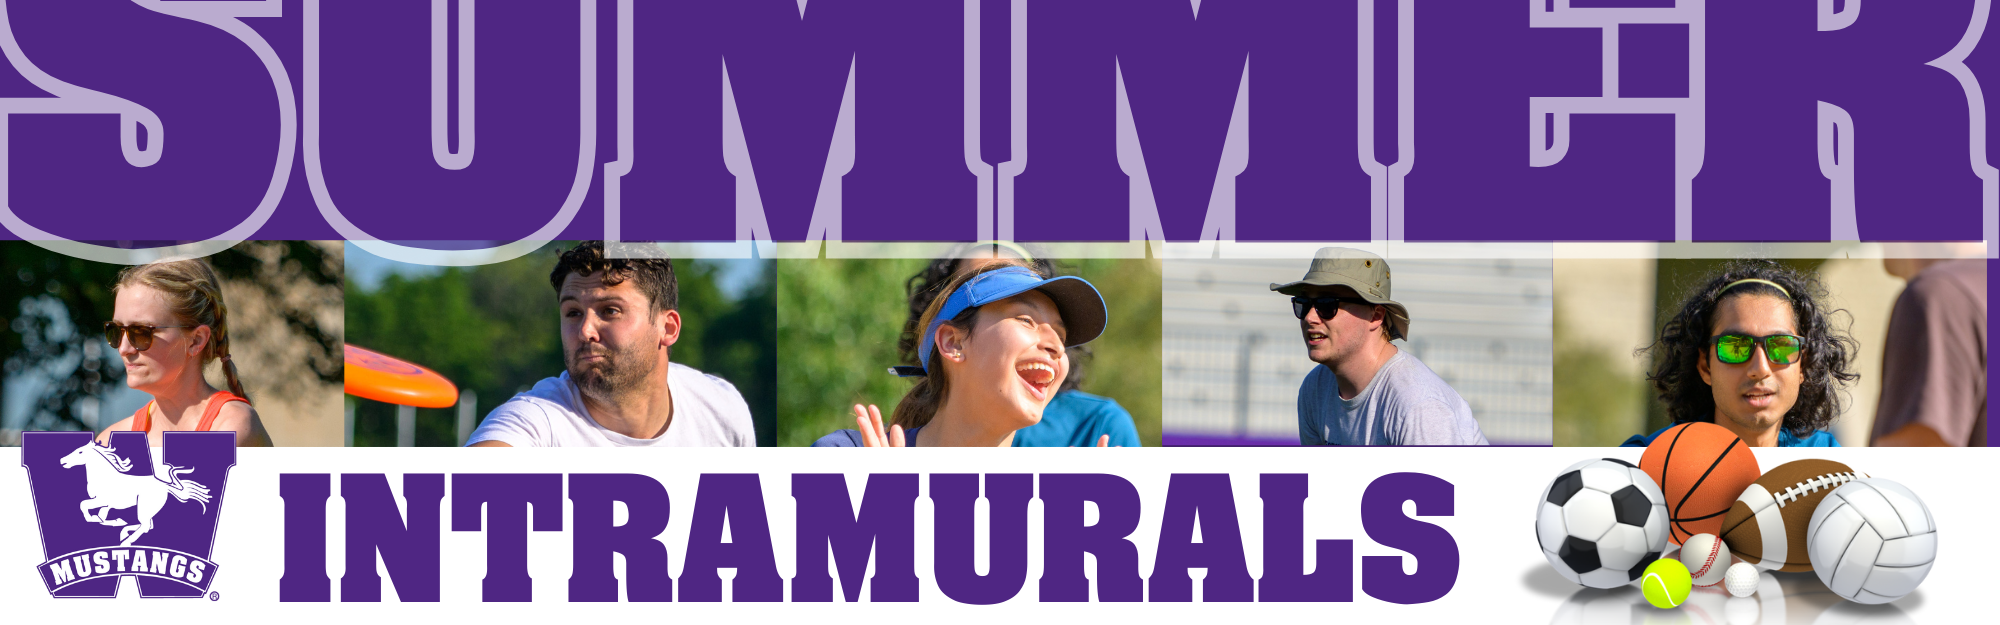 Summer Intramurals. Photos of students participating in intramural sports. SUMMER. Western Mustangs logo. Cartoon graphics of sports balls.